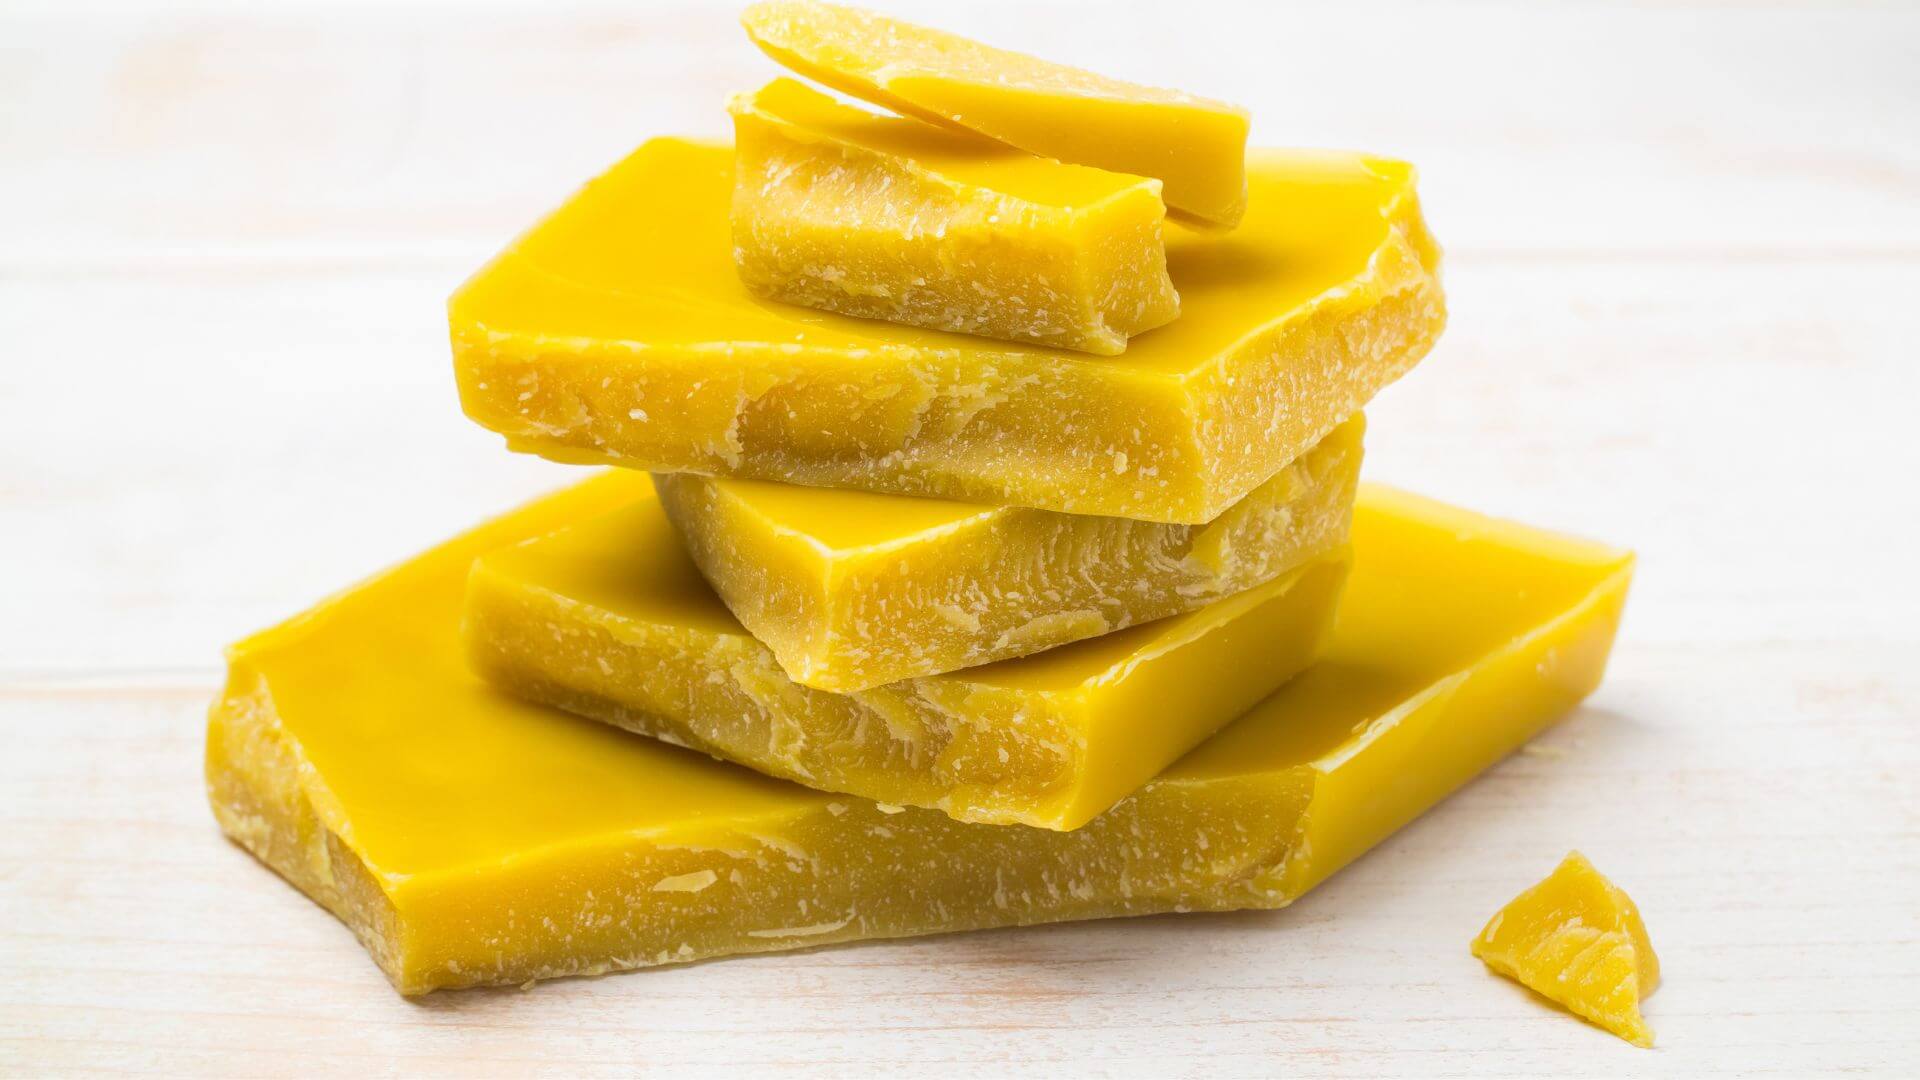 Collombatti Naturals 7 compelling reasons to buy Australian beeswax picture of pure beeswax